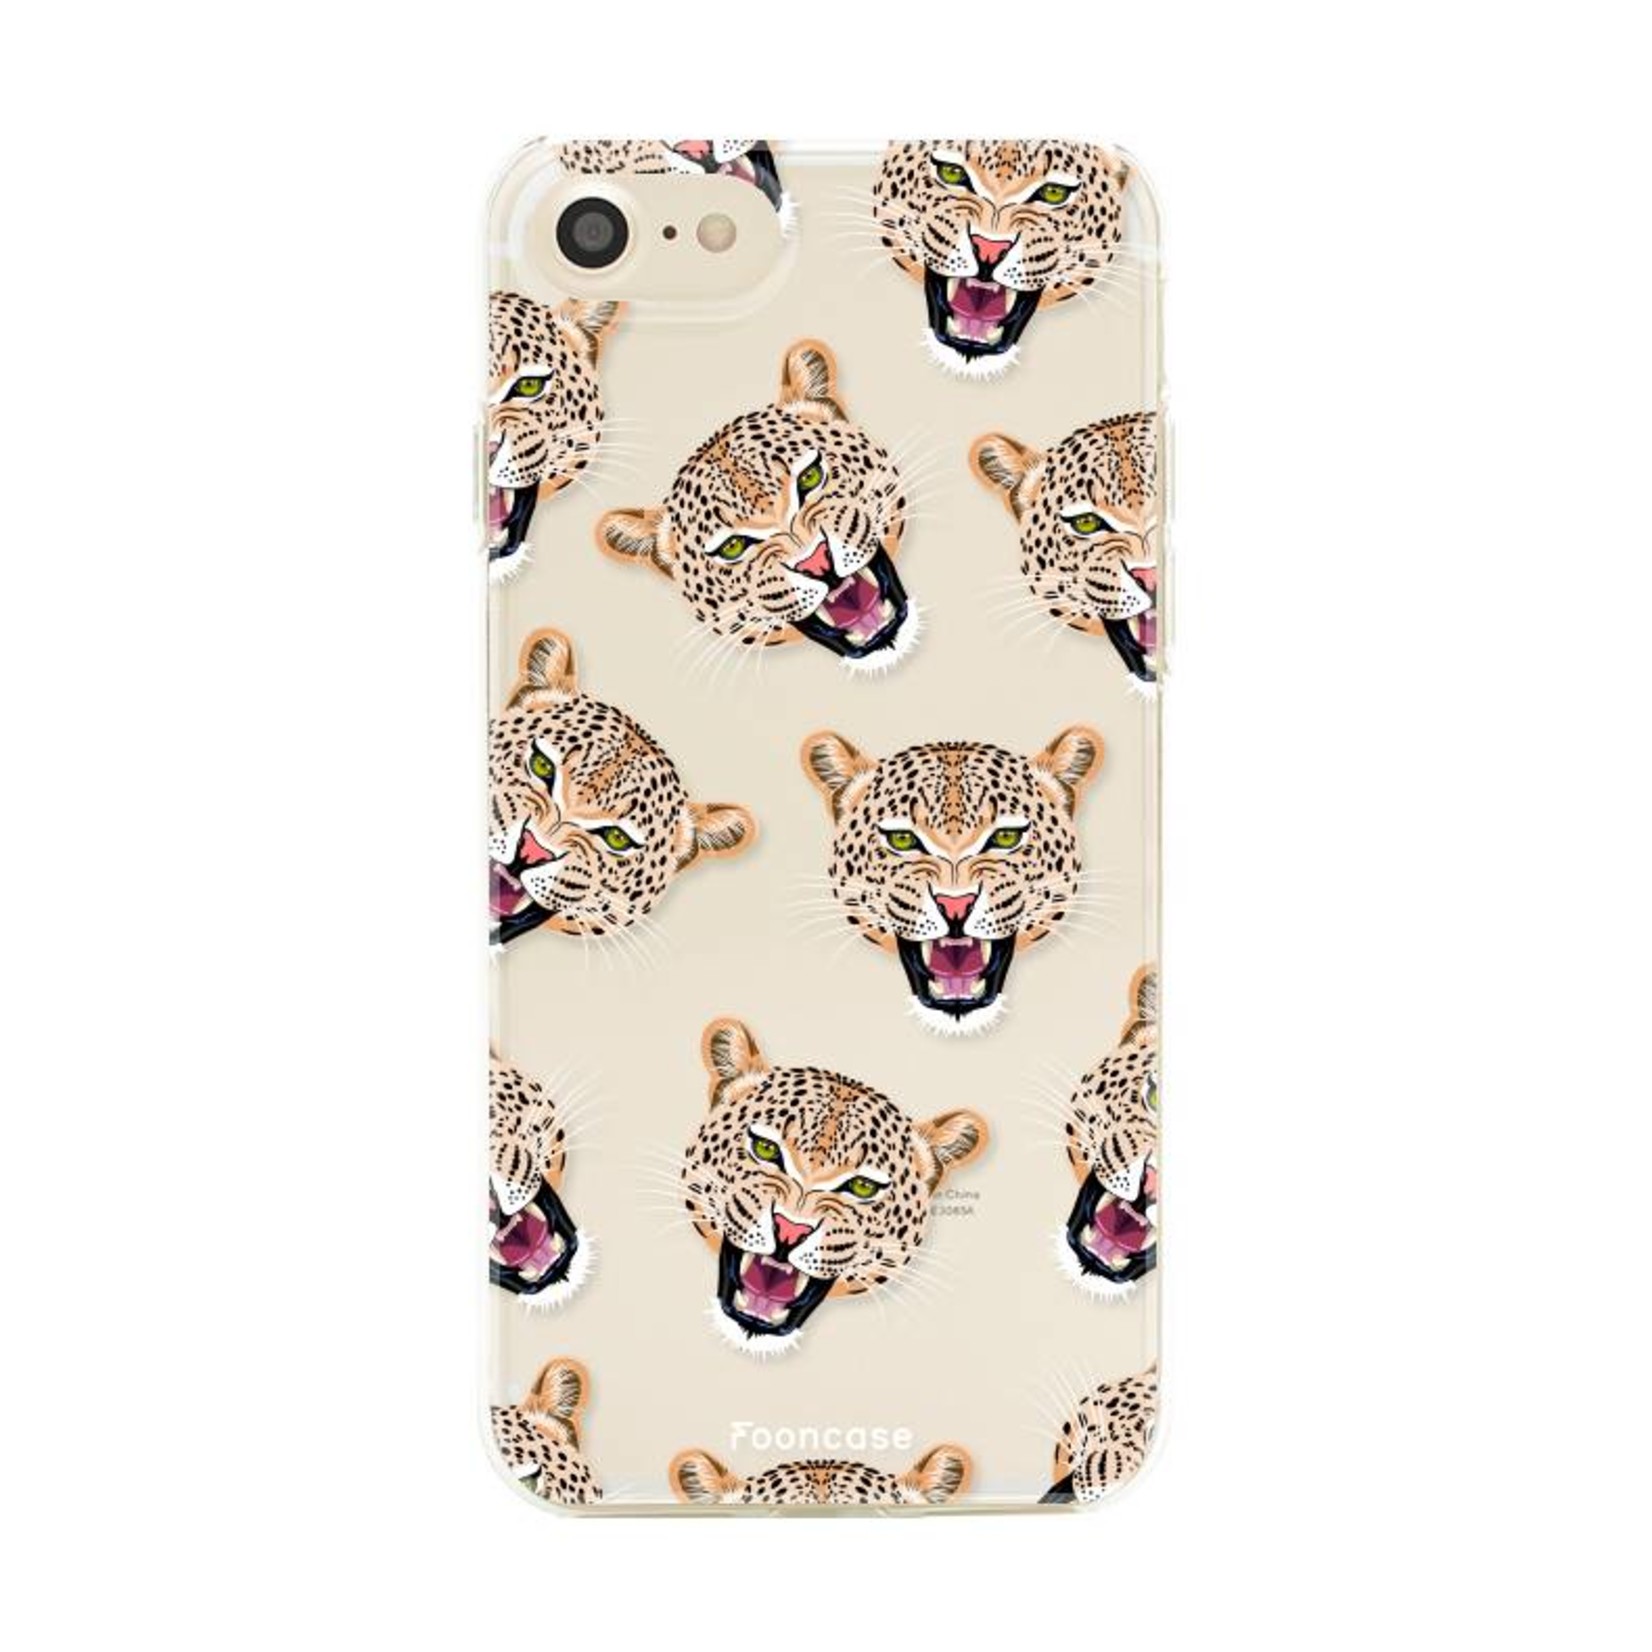 FOONCASE iPhone 8 hoesje TPU Soft Case - Back Cover - Cheeky Leopard